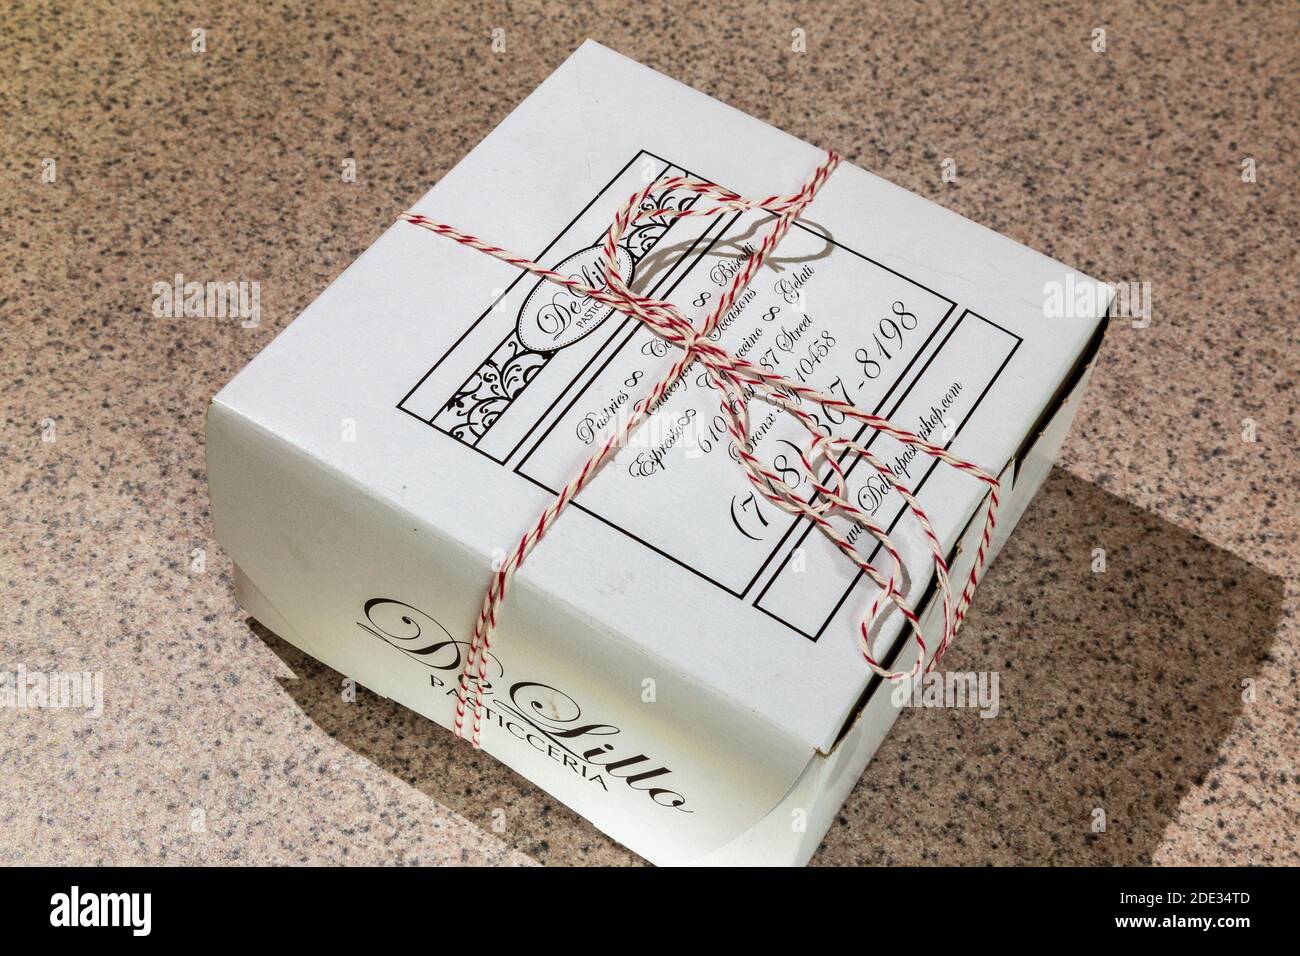 De Lillo Pasticceria cardboard pastry box tied with red and white twine, Bronx, New York, USA Stock Photo